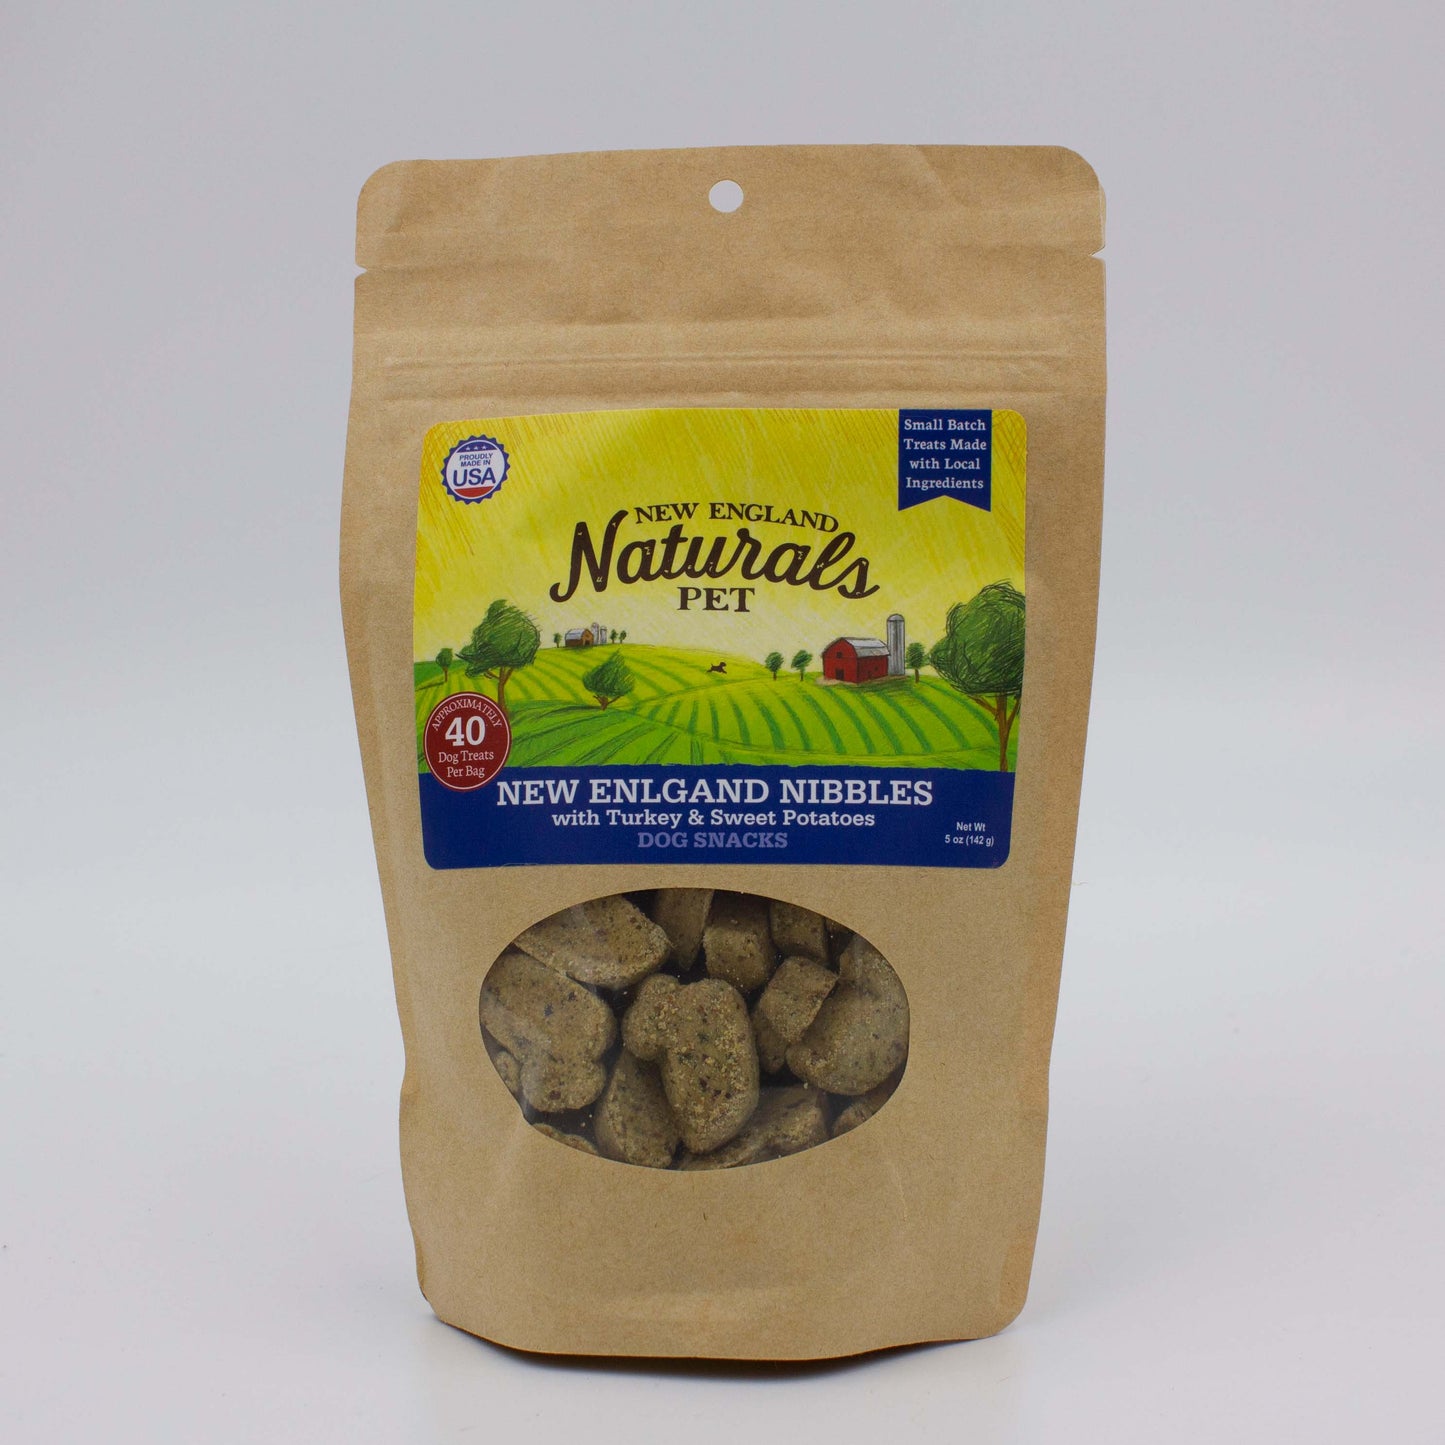 New England Naturals New England Nibbles with Turkey & Sweet Potatoes